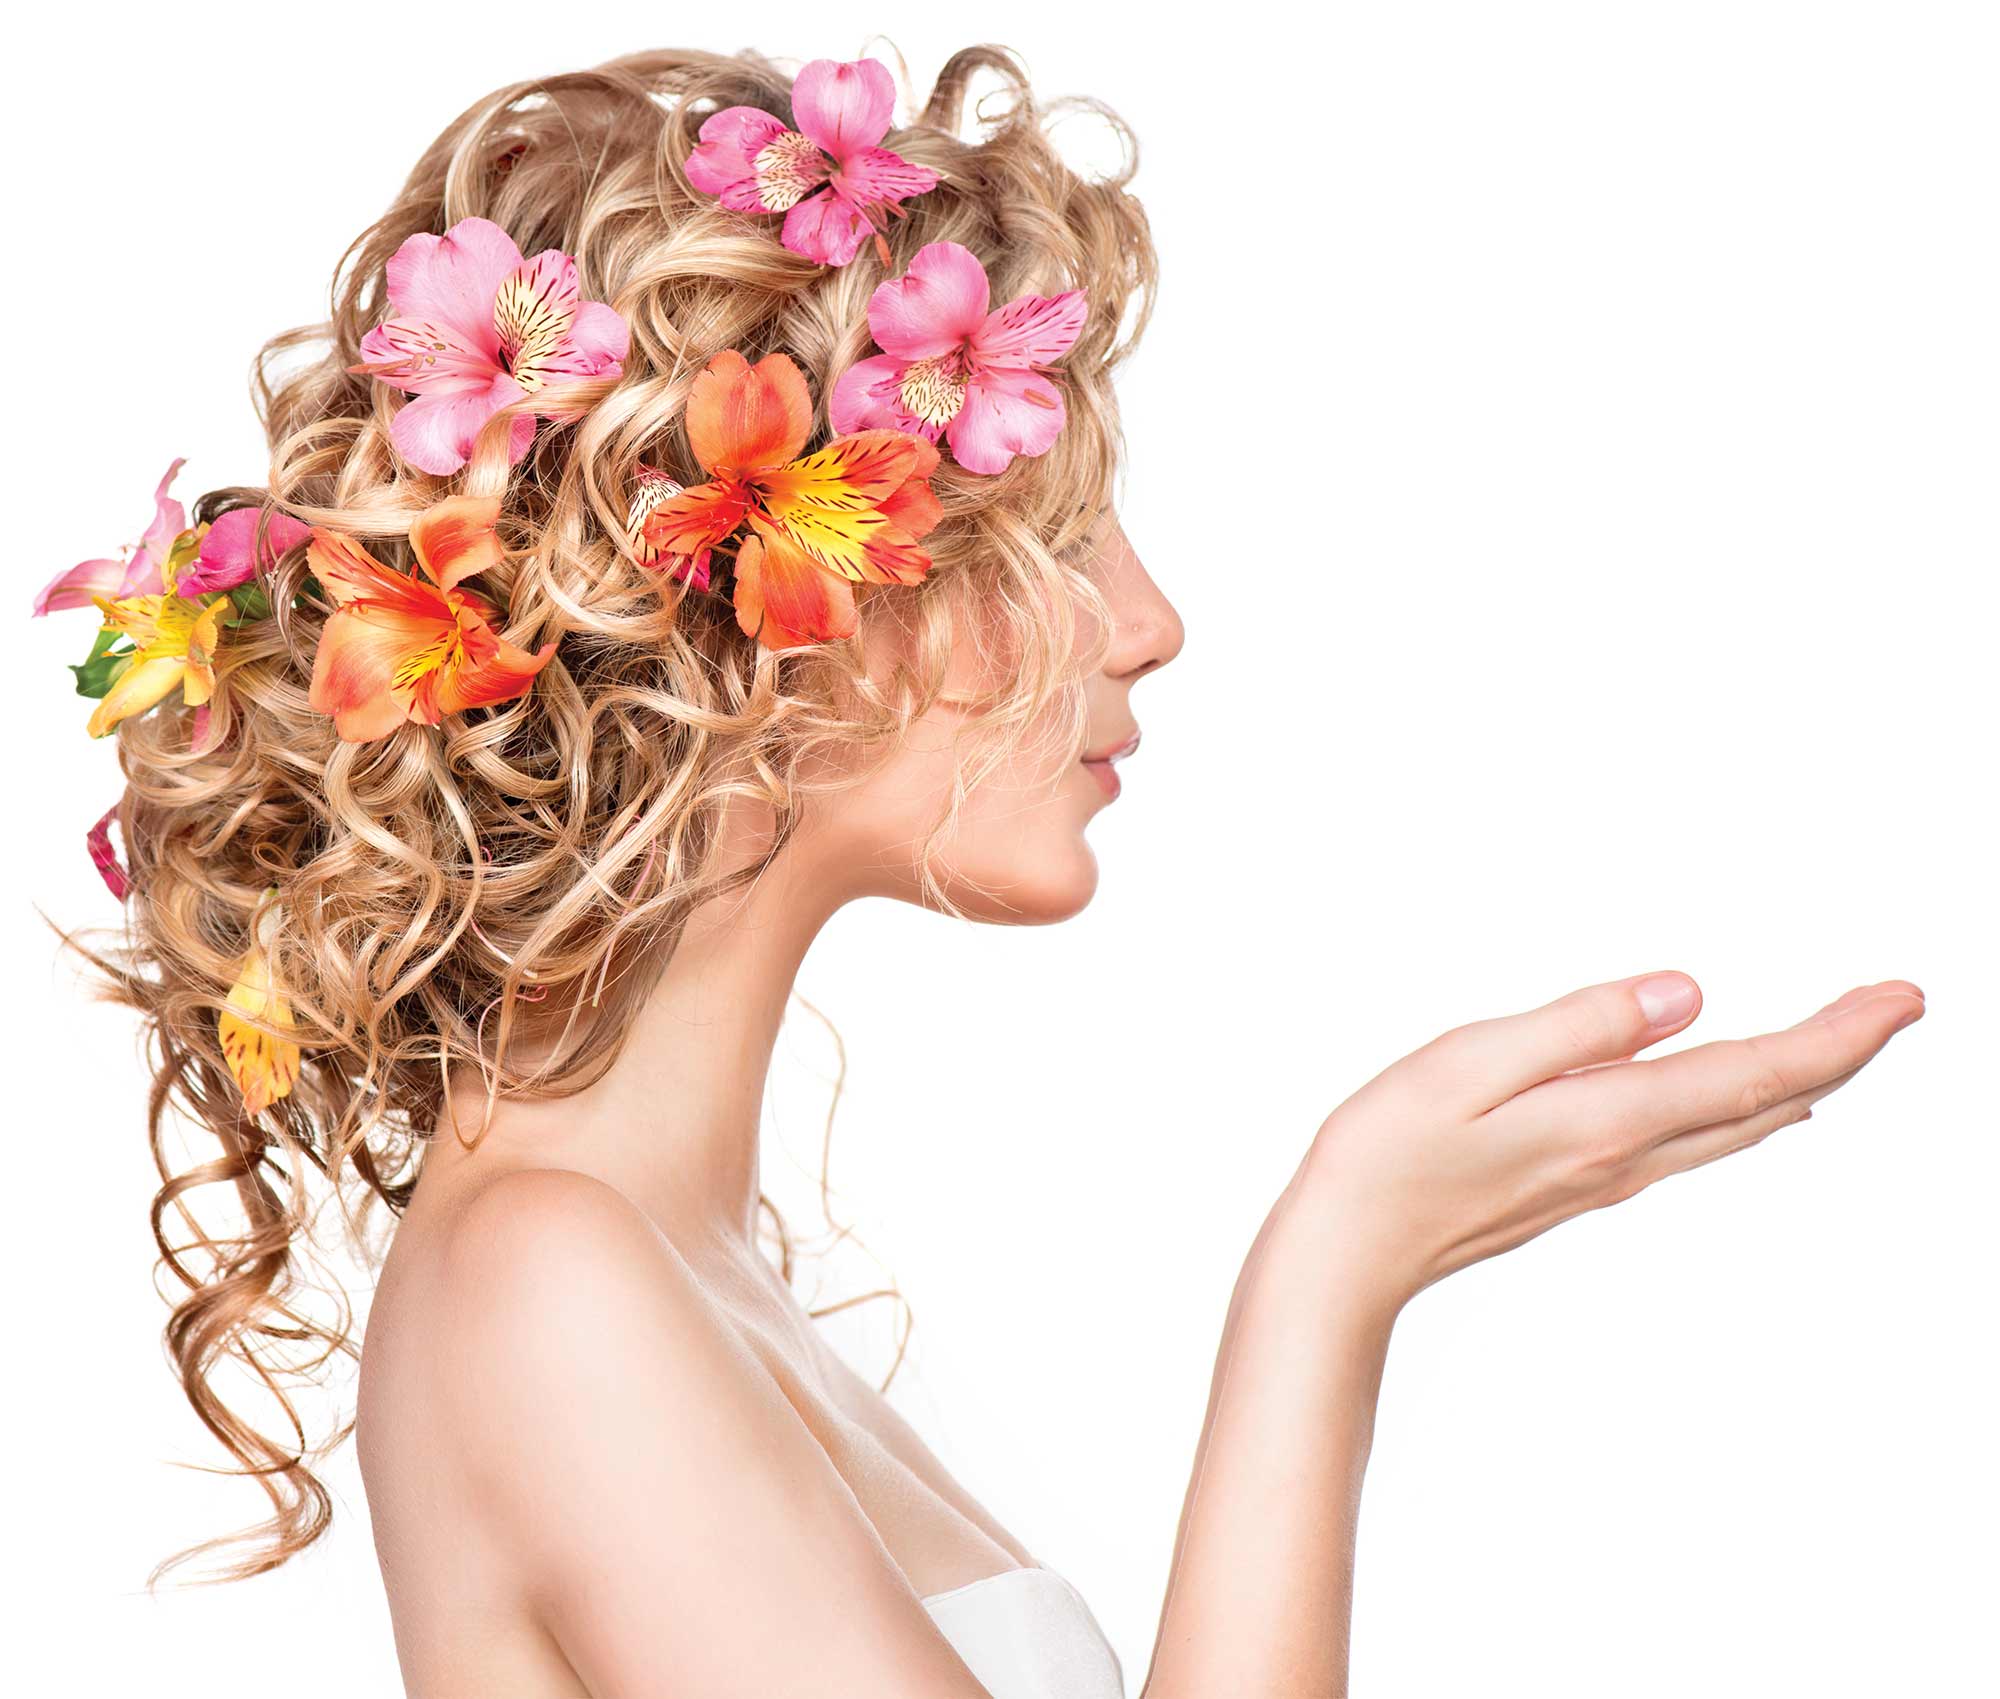 woman with flowers in her hairs